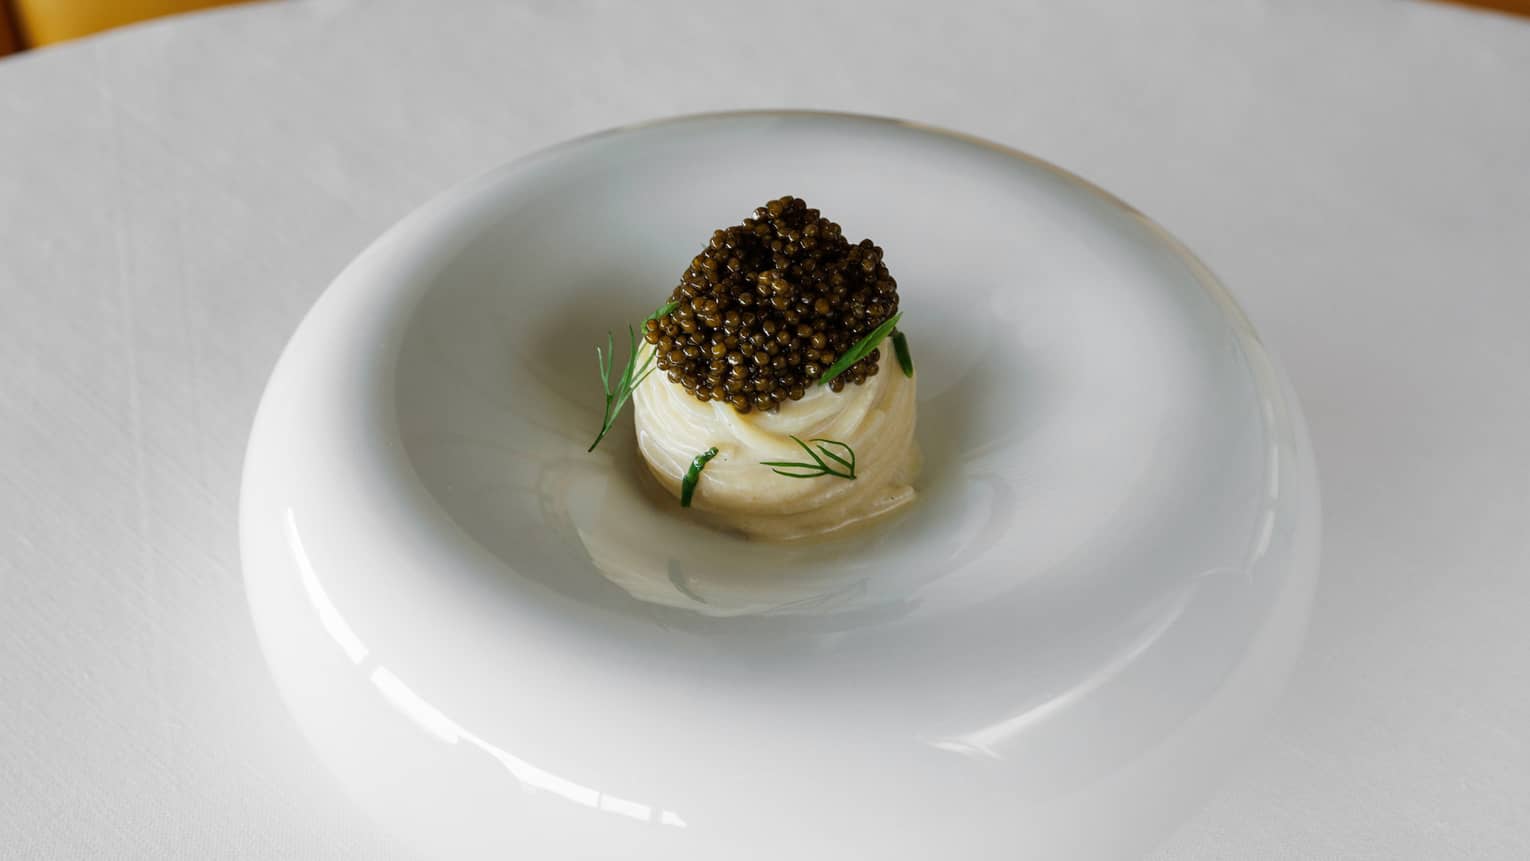 Elegant timbale topped with caviar and garnished with dill sprigs on avant-garde white dish